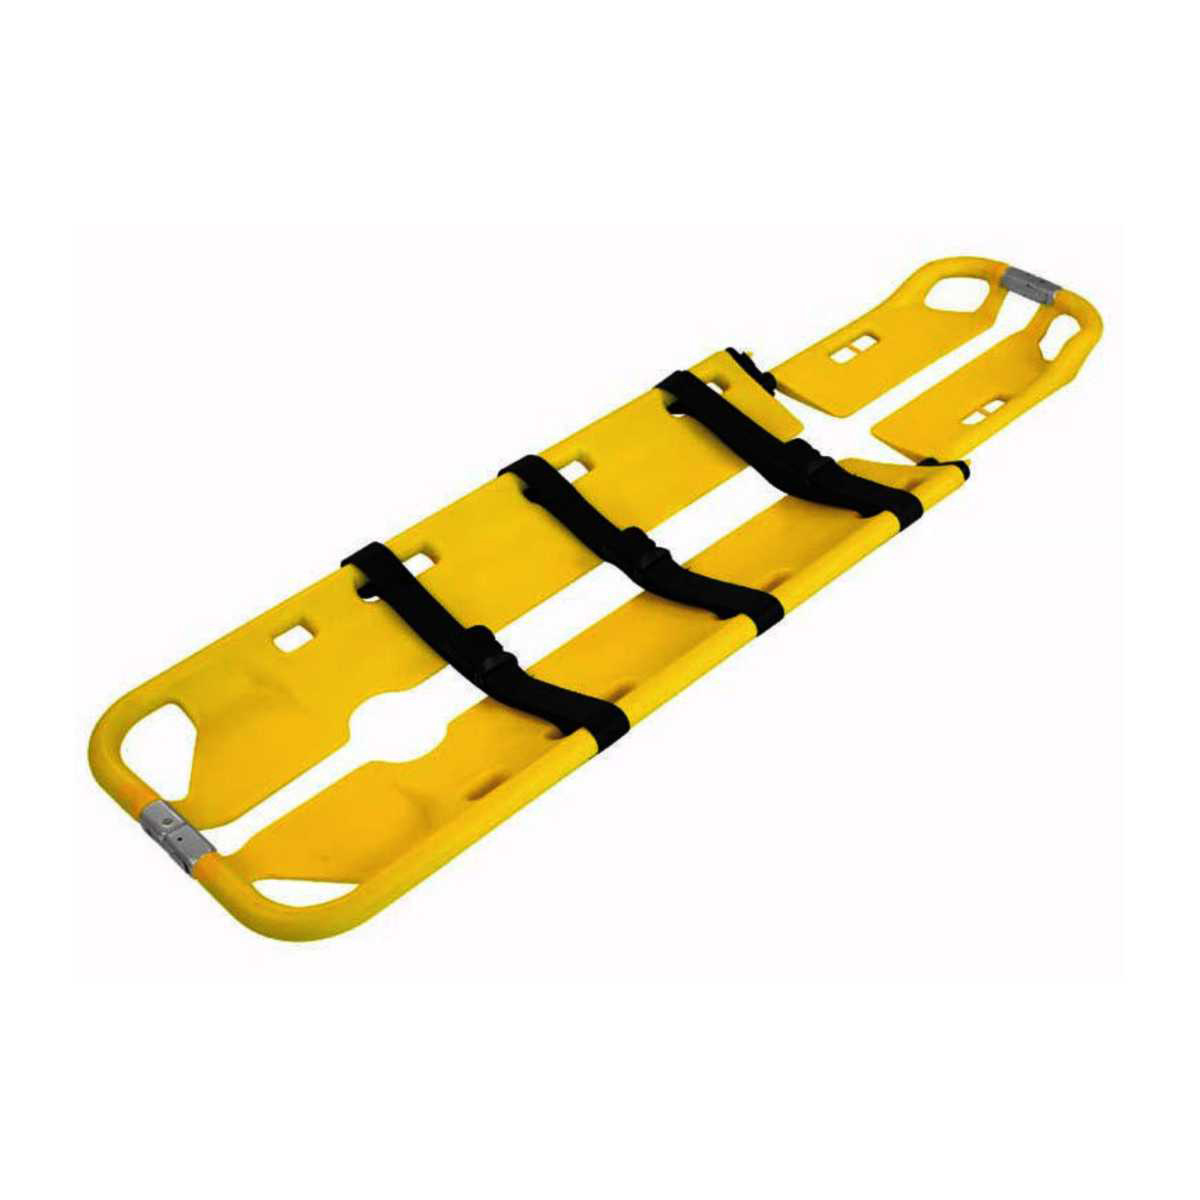 Scoope Rescue Stretcher  HALOMEDICALS SYSTEMS LIMITED